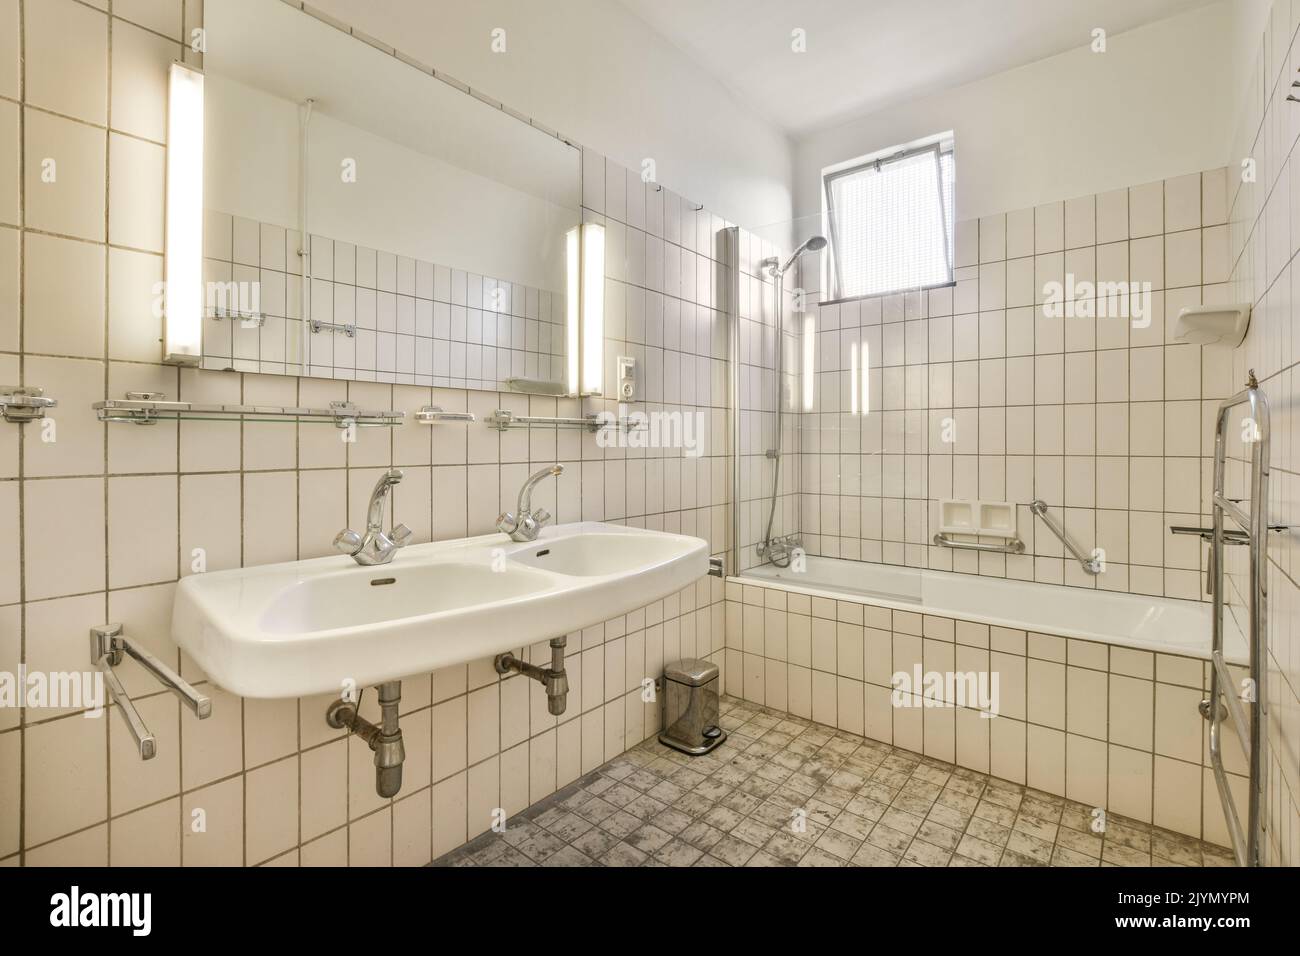 Bathroom with white tiled walls near sink in light Stock Photo